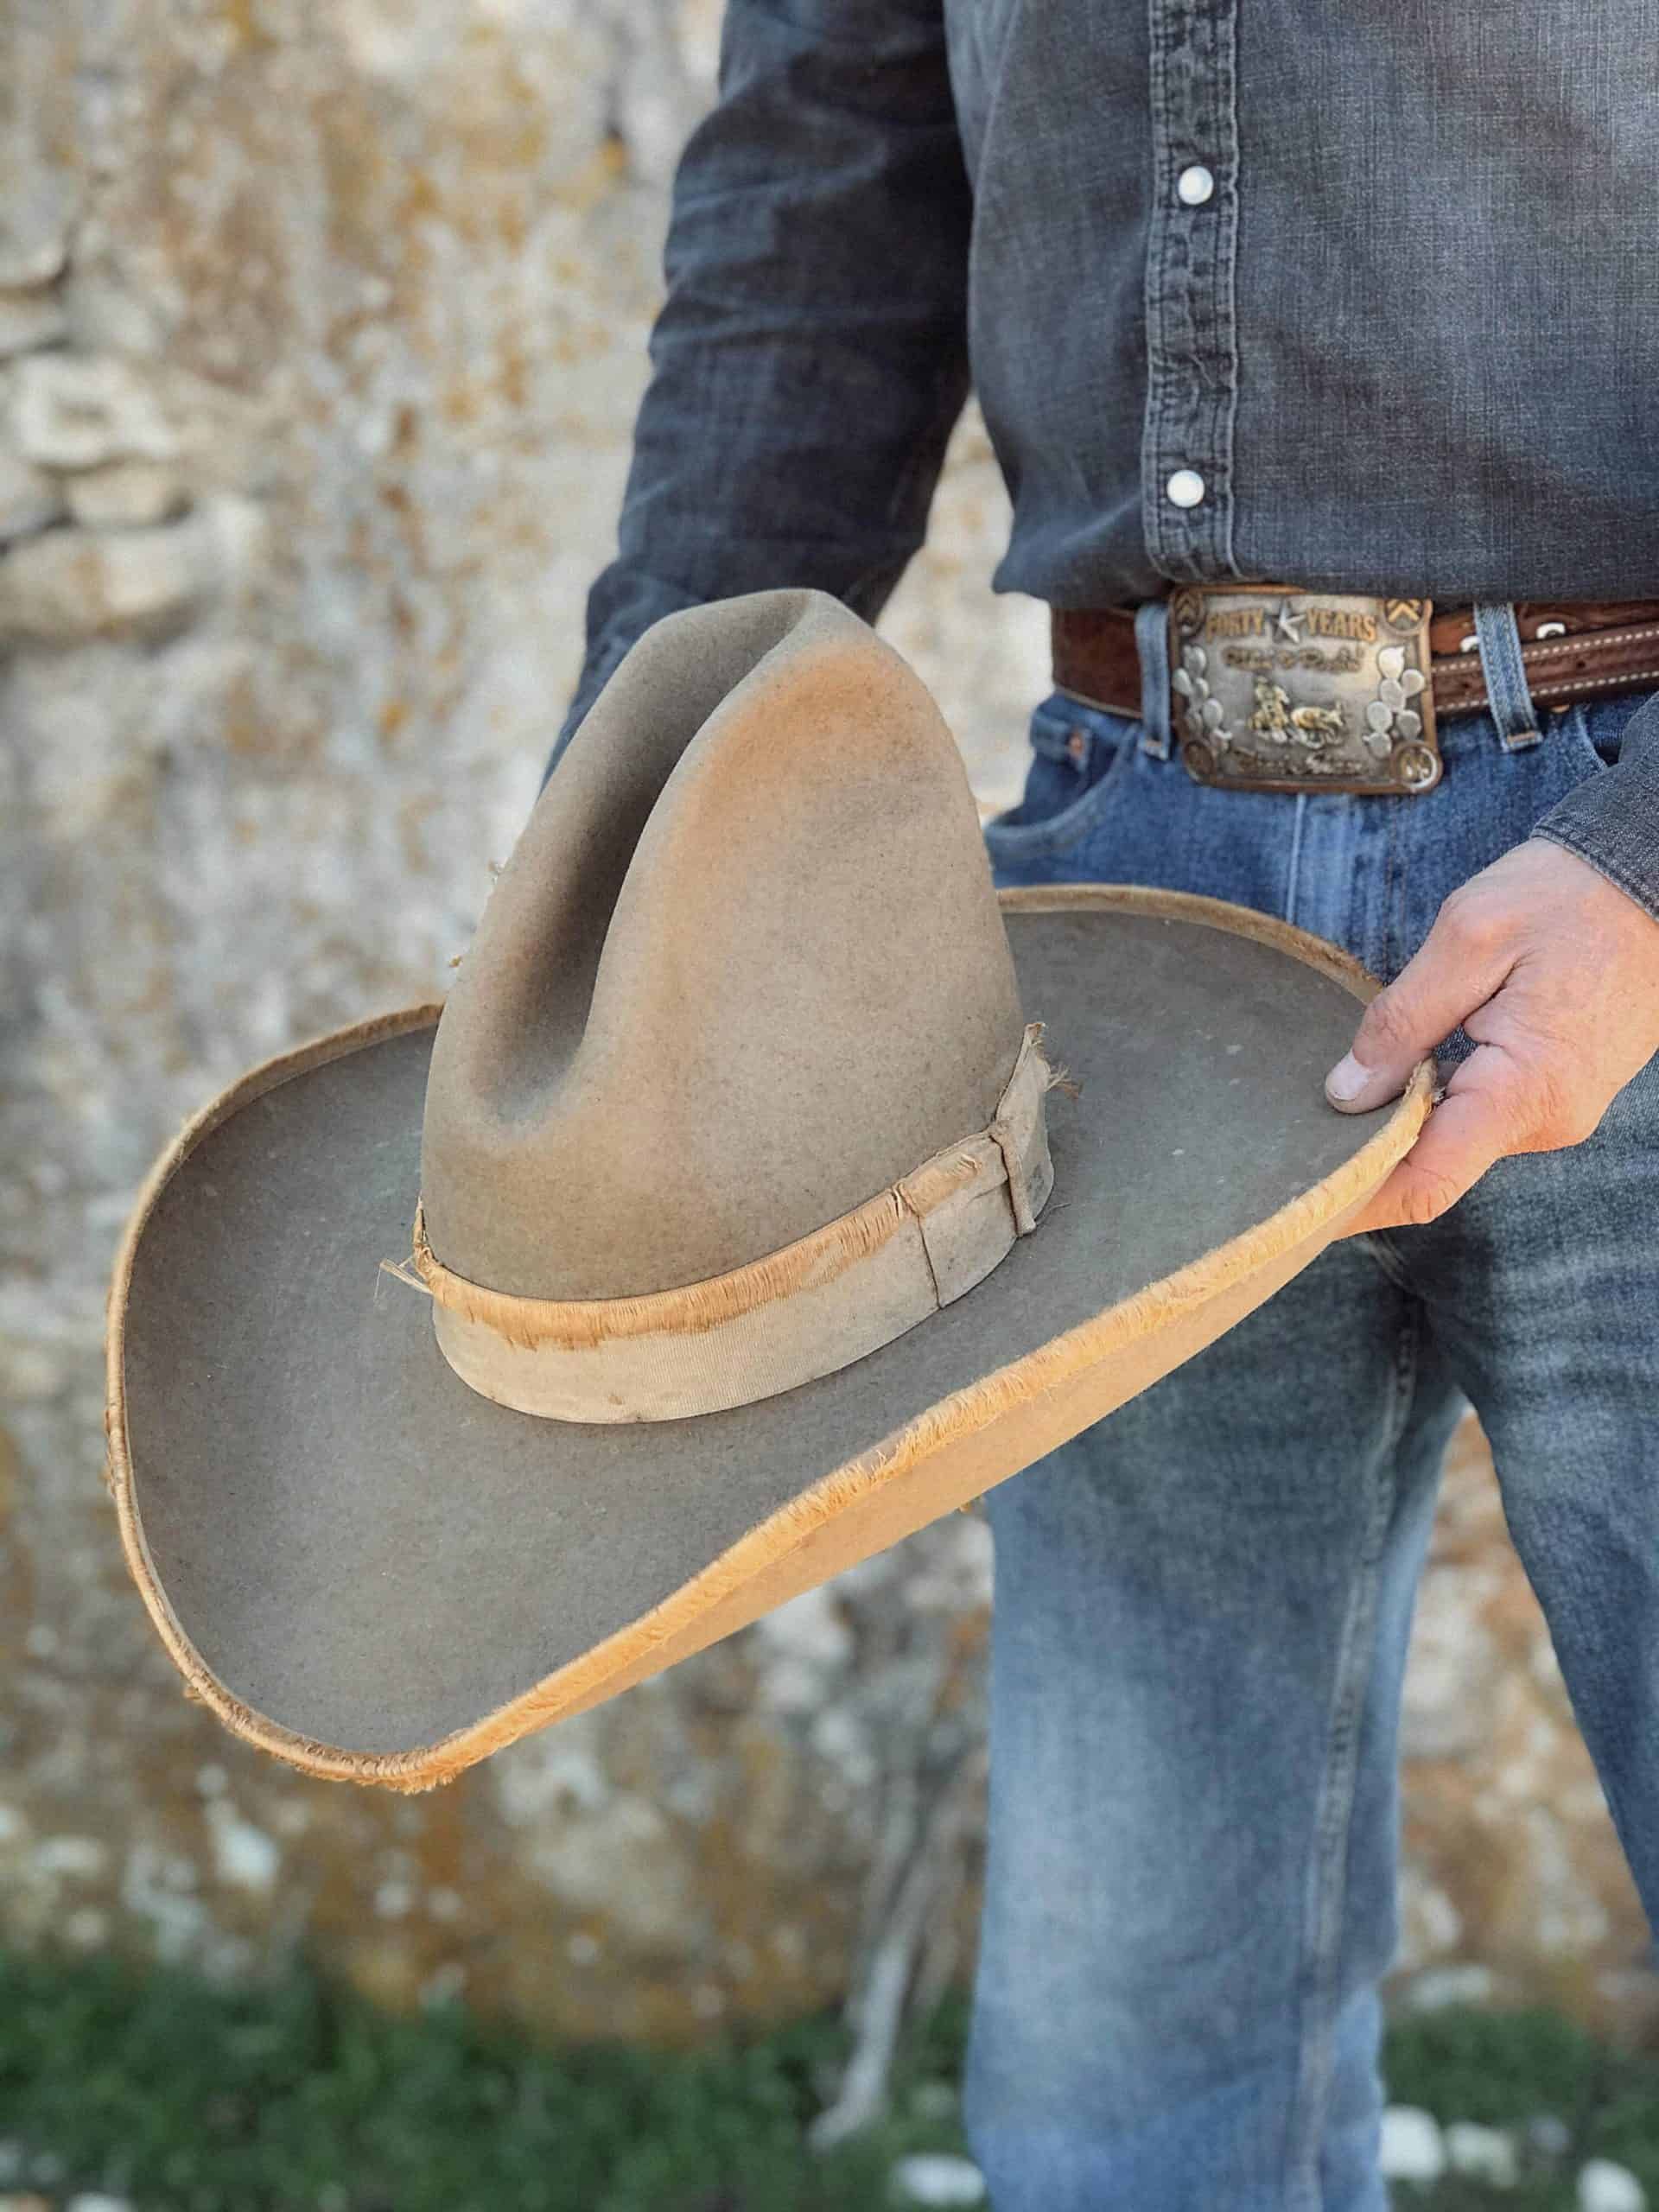 Cowboy
Hats For Men For Trends And Fashion